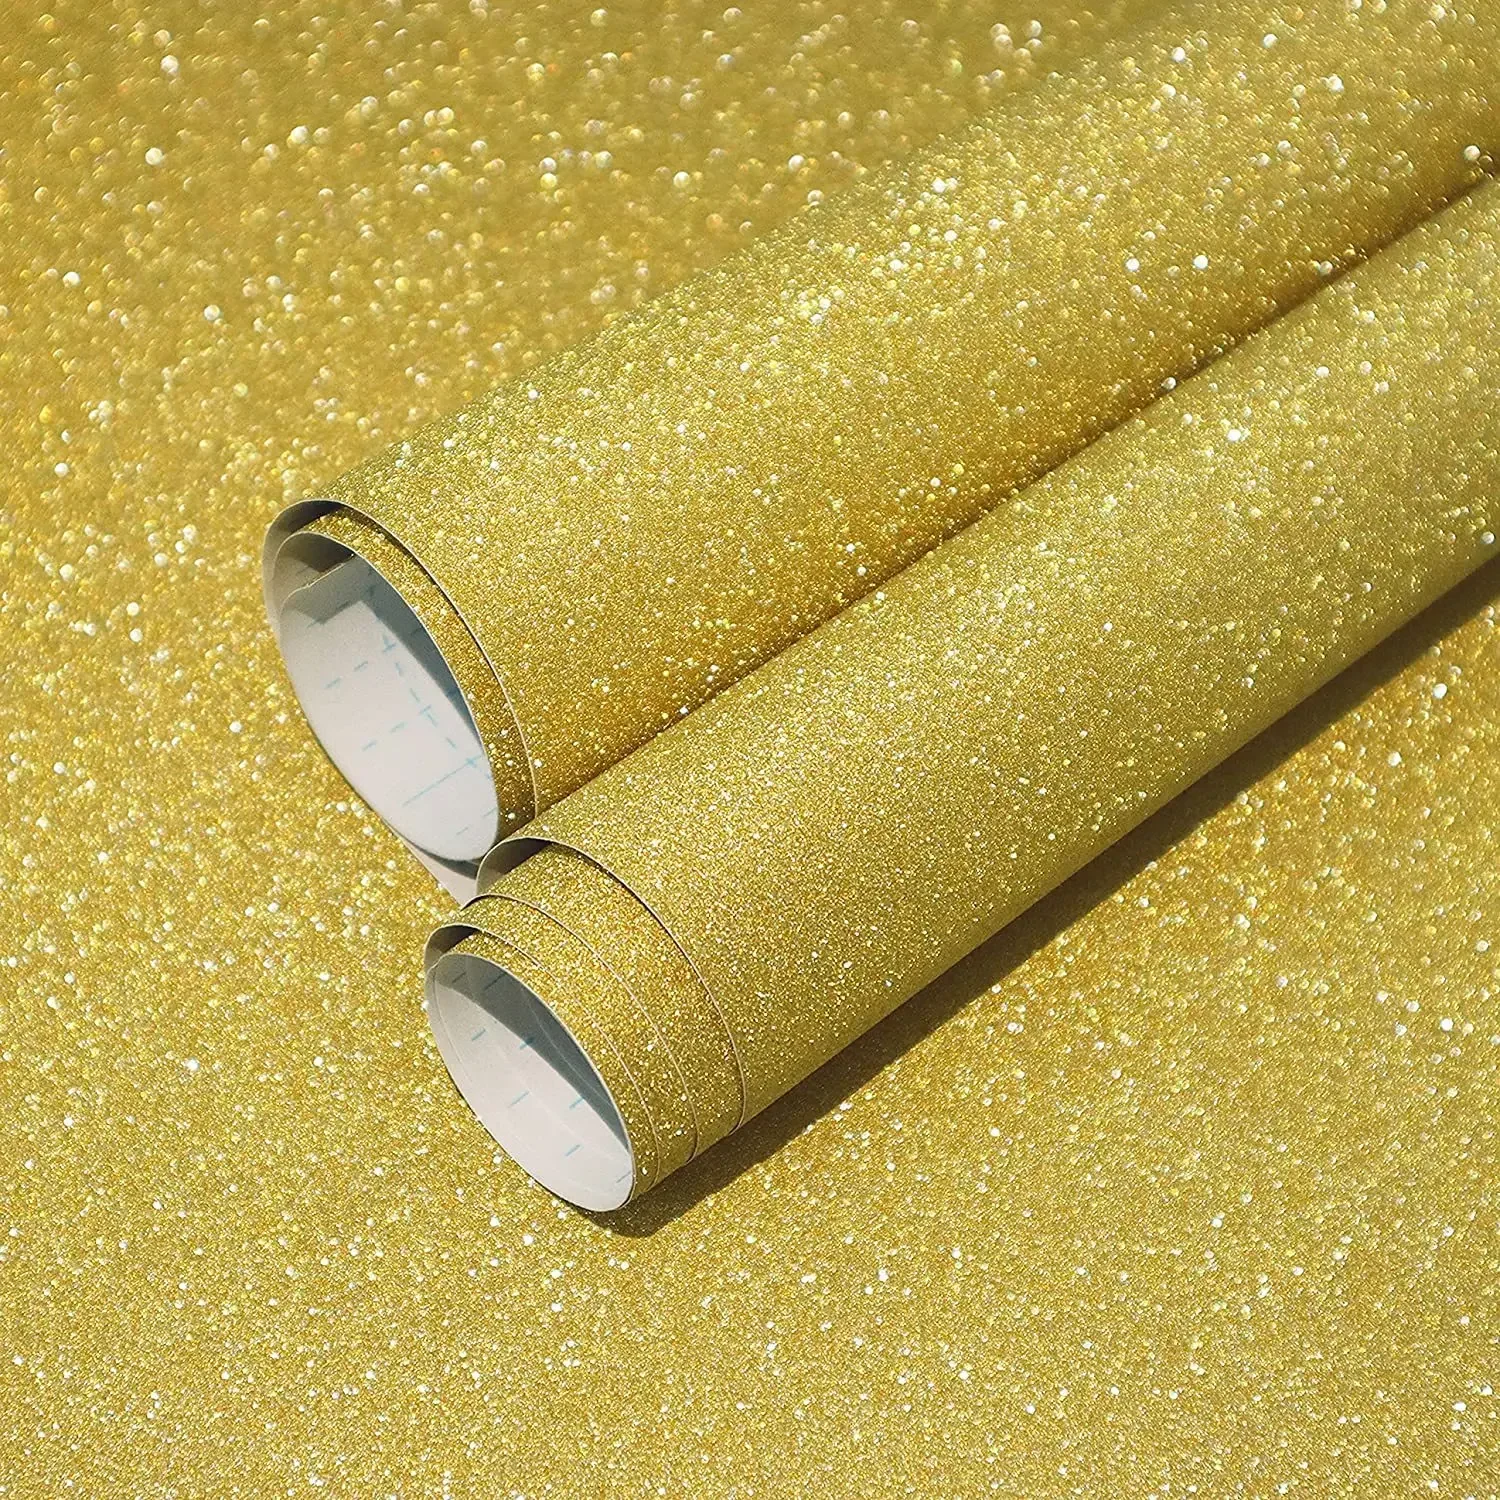 Multifunction Glitter Contact Paper Peel and Stick Silver Gold Wallpaper Vinyl Film Self Adhesive Wall Paper. 200 500pcs merci kraft sticker french thank you fait main avec amour diy multifunction paper label adhesive gift seal sticker